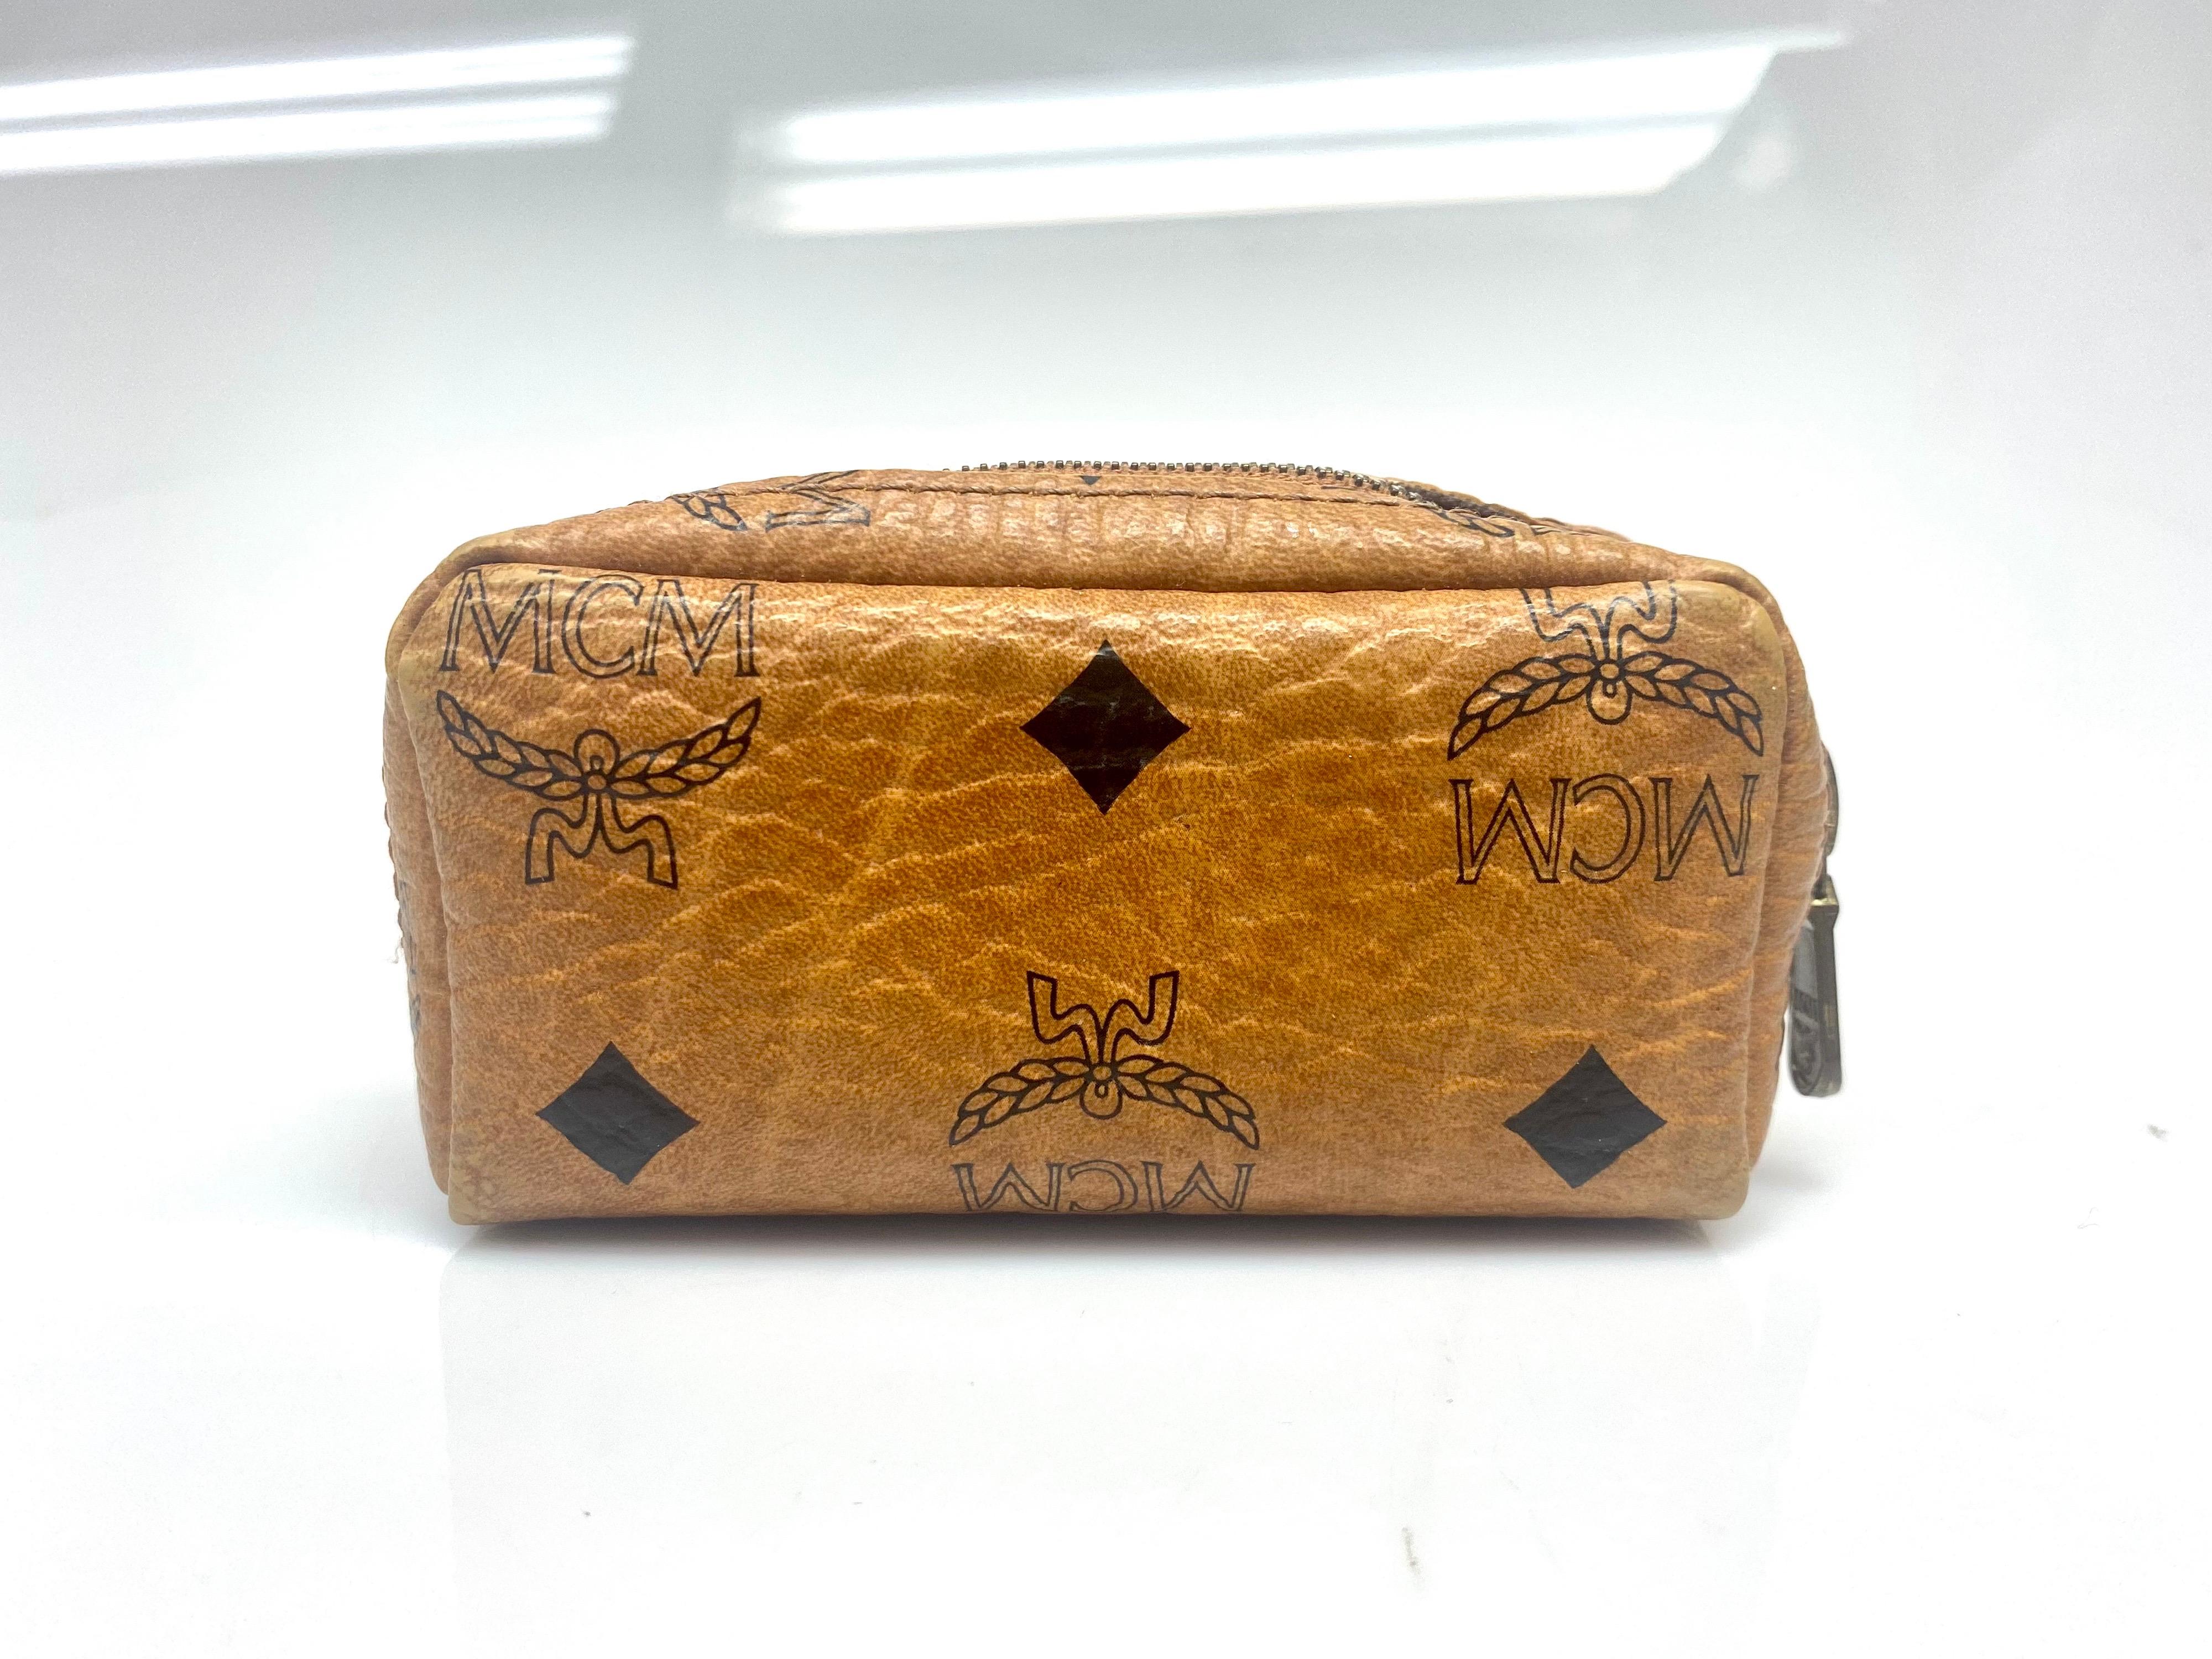 MCM Monogram Tan Coin Purse Keychain. MCM zip pouch in signature Visetos and nappa leather with keychain. This vintage item is in very good condition with small signs of wear.

Dimensions: 

W: 5